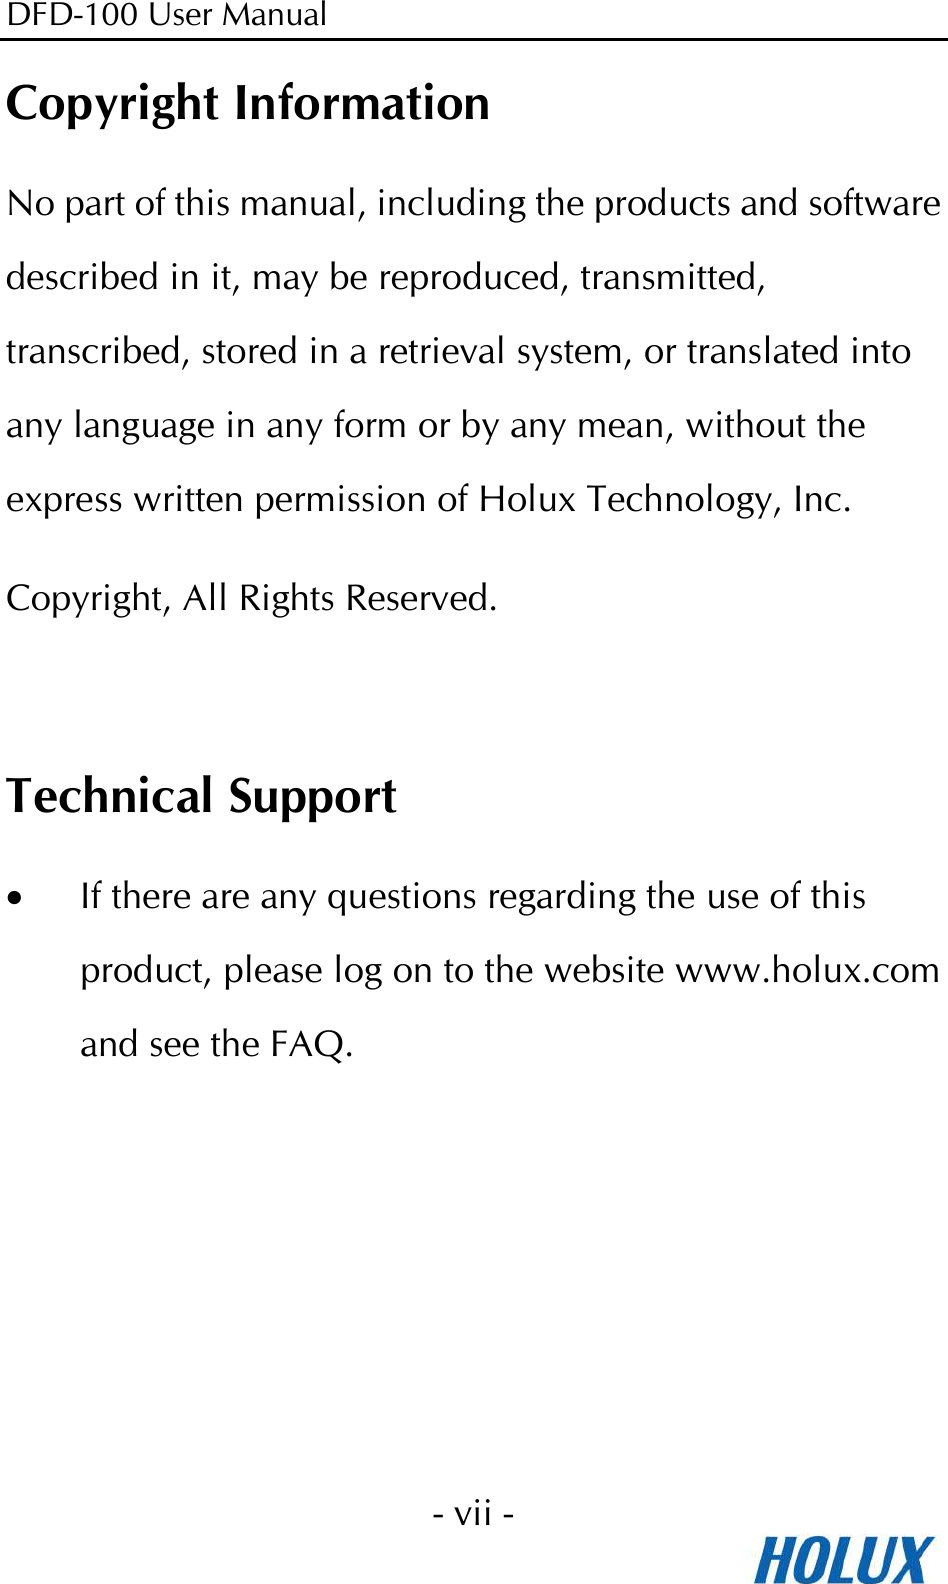 DFD-100 User Manual - vii -  Copyright Information No part of this manual, including the products and software described in it, may be reproduced, transmitted, transcribed, stored in a retrieval system, or translated into any language in any form or by any mean, without the express written permission of Holux Technology, Inc. Copyright, All Rights Reserved.  Technical Support • If there are any questions regarding the use of this product, please log on to the website www.holux.com and see the FAQ.  